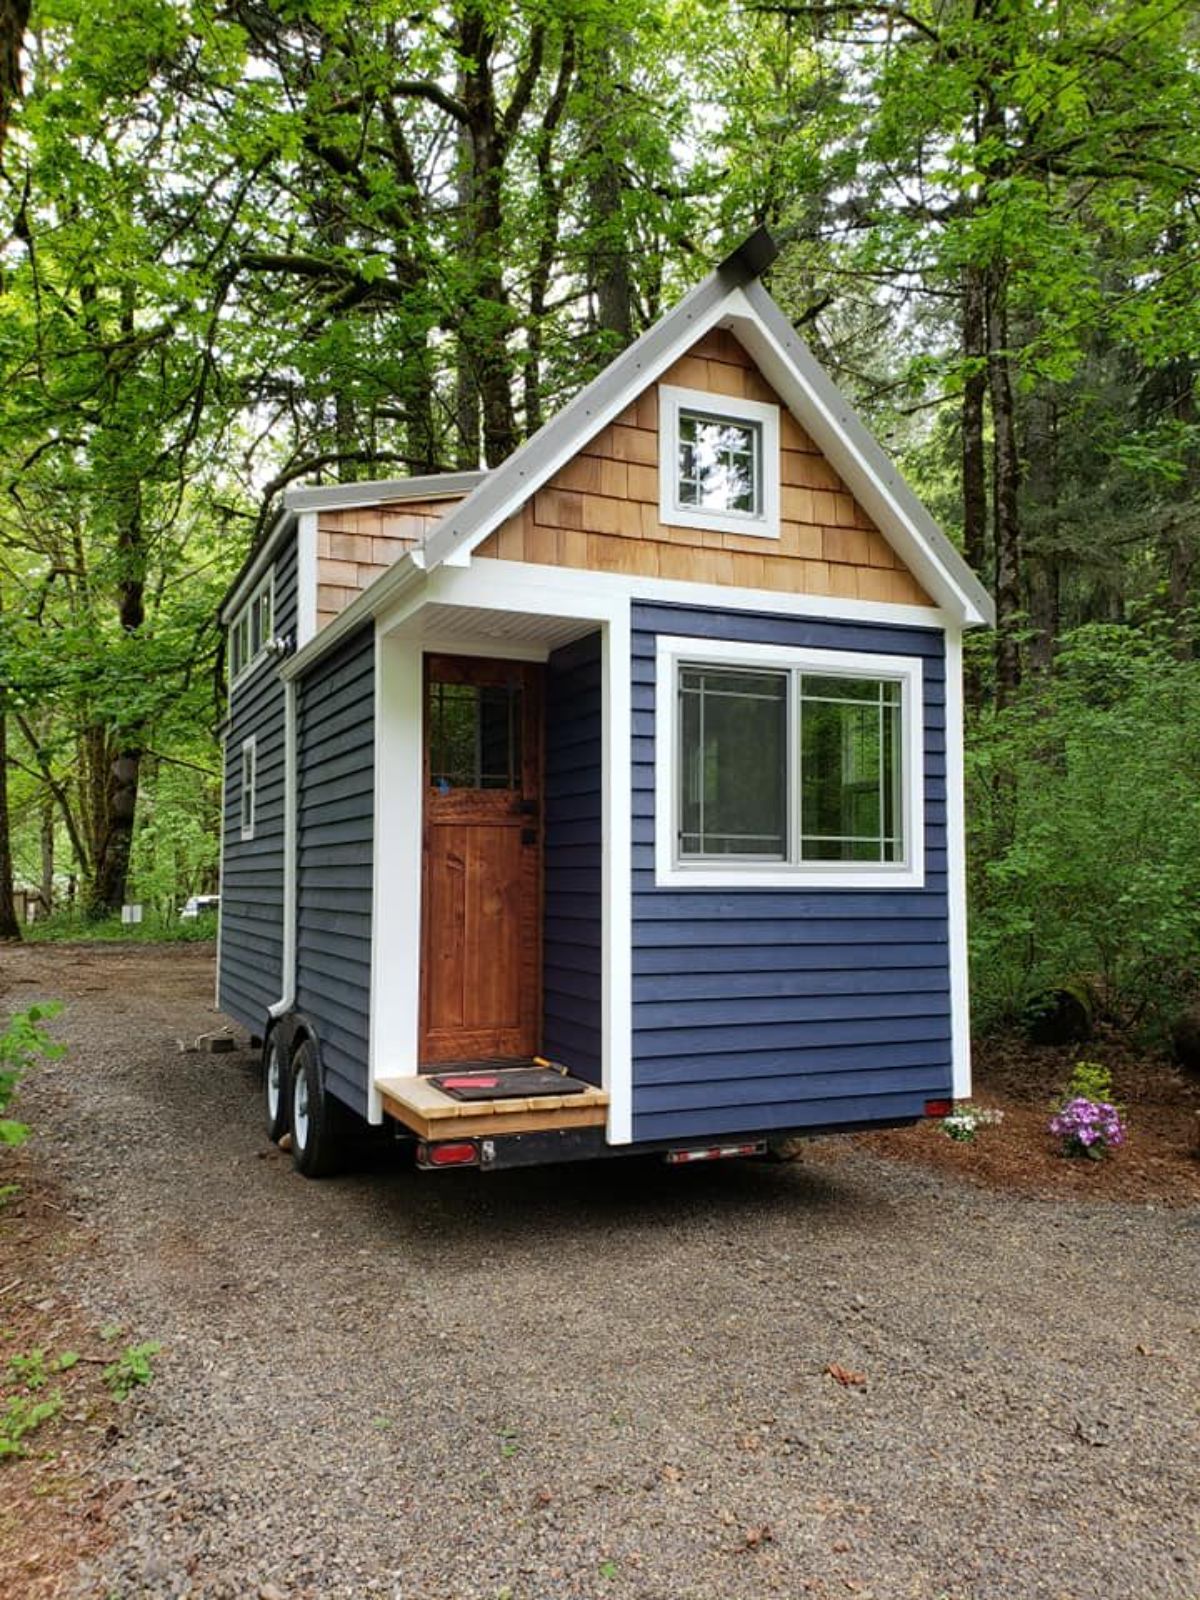 Main entrance and stunning exterior of tiny house with two lofts